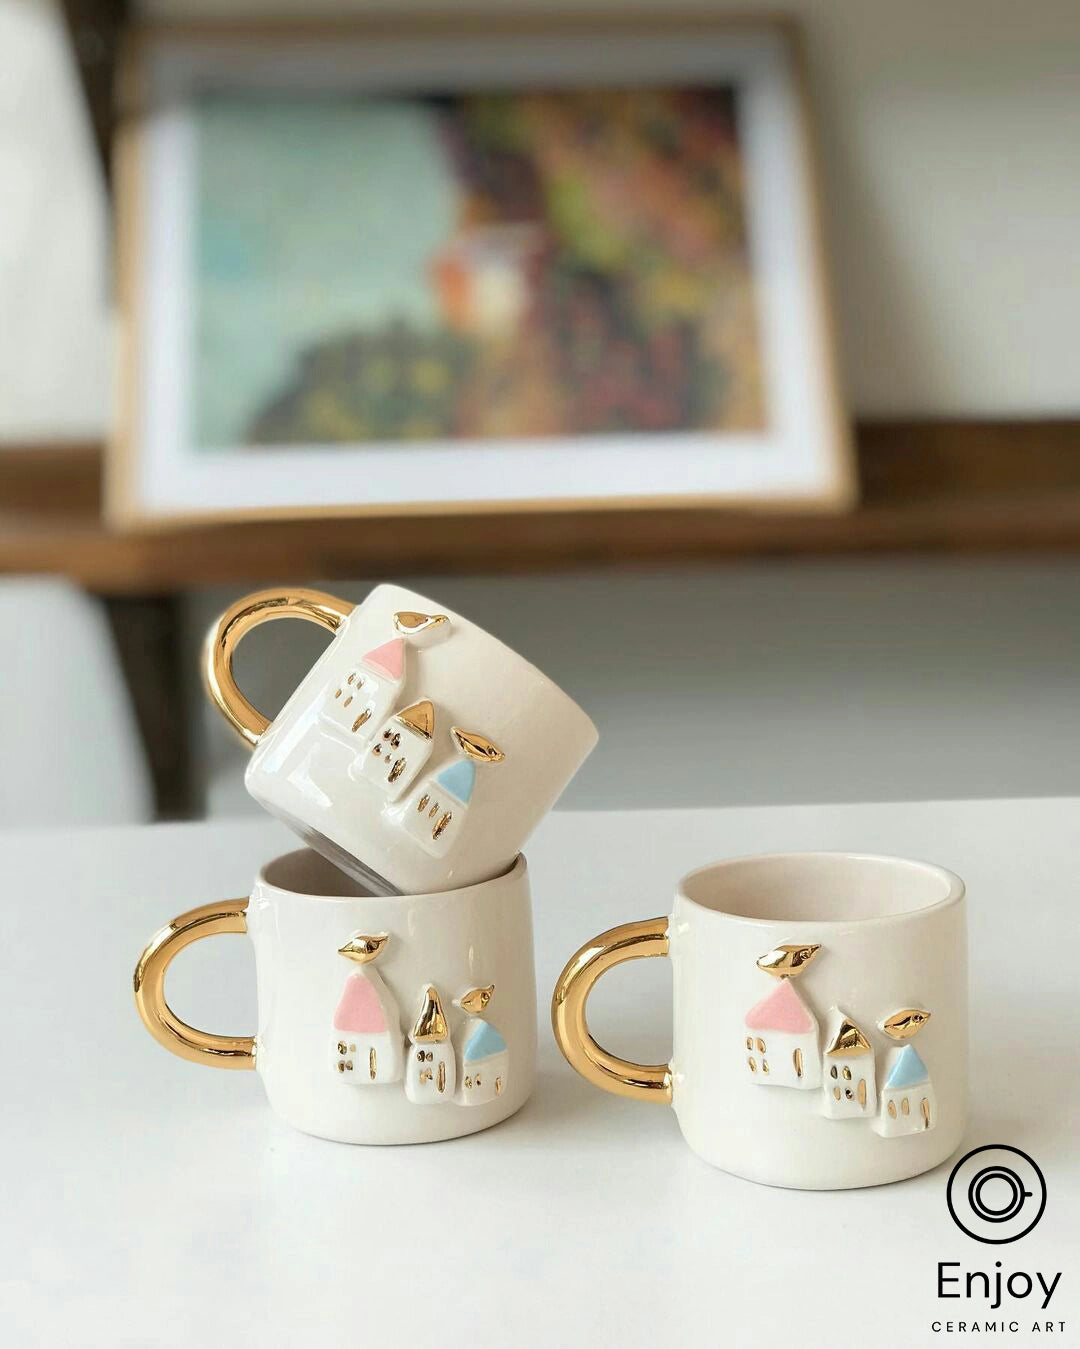 Handmade 'Masal' Little Houses Espresso Cup & Saucer Set - 5.4 oz Ceramic Espresso Mugs with Gold Handle, Perfect Realtor Gift or Housewarming Present